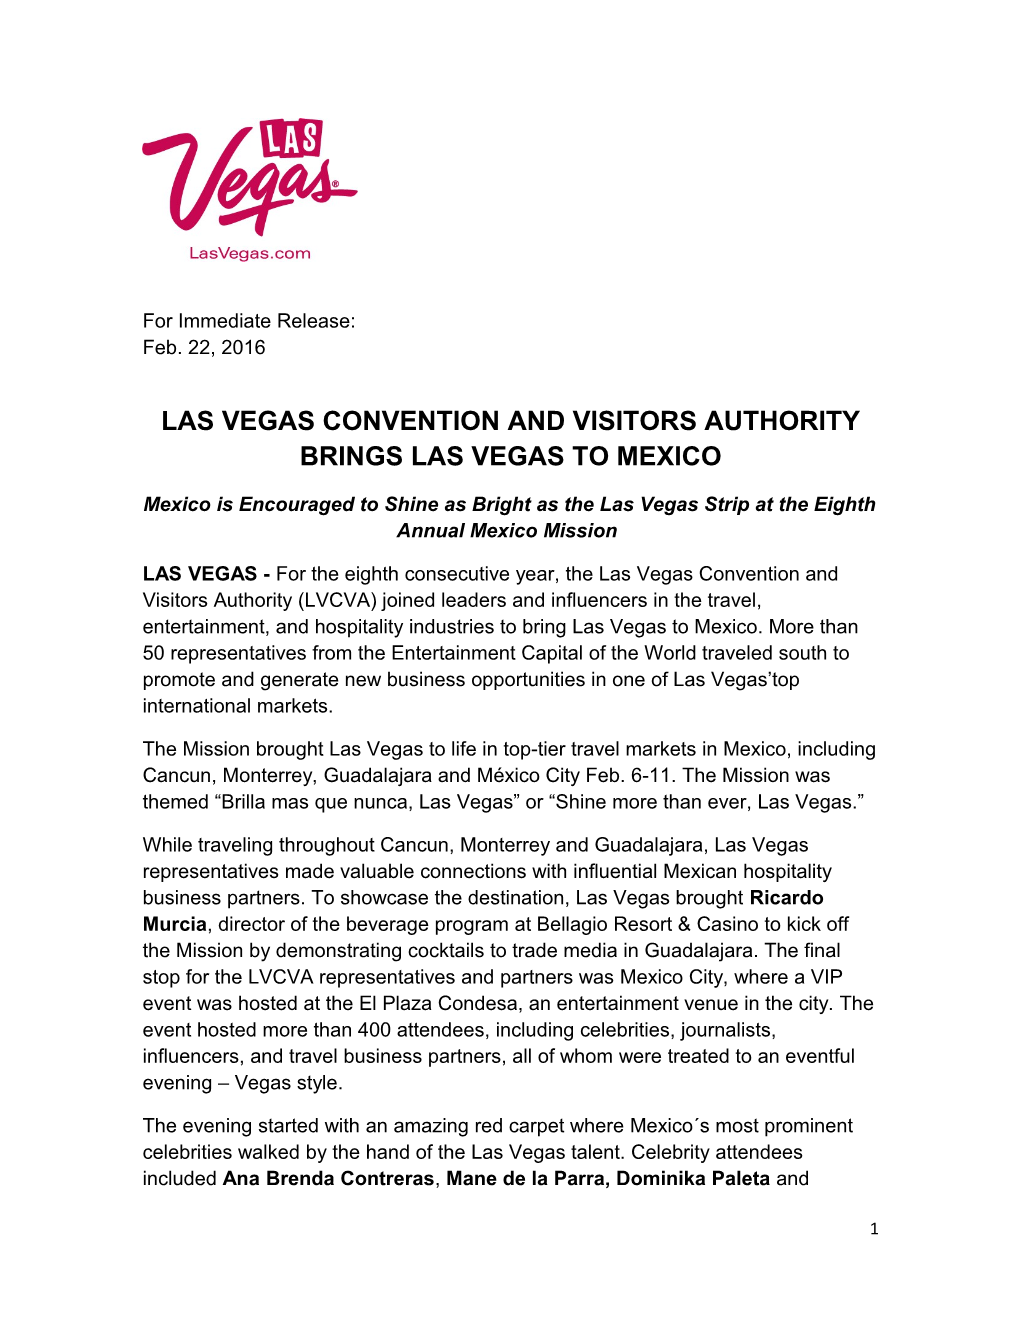 Las Vegas Convention and Visitors Authority Brings Las Vegas to Mexico